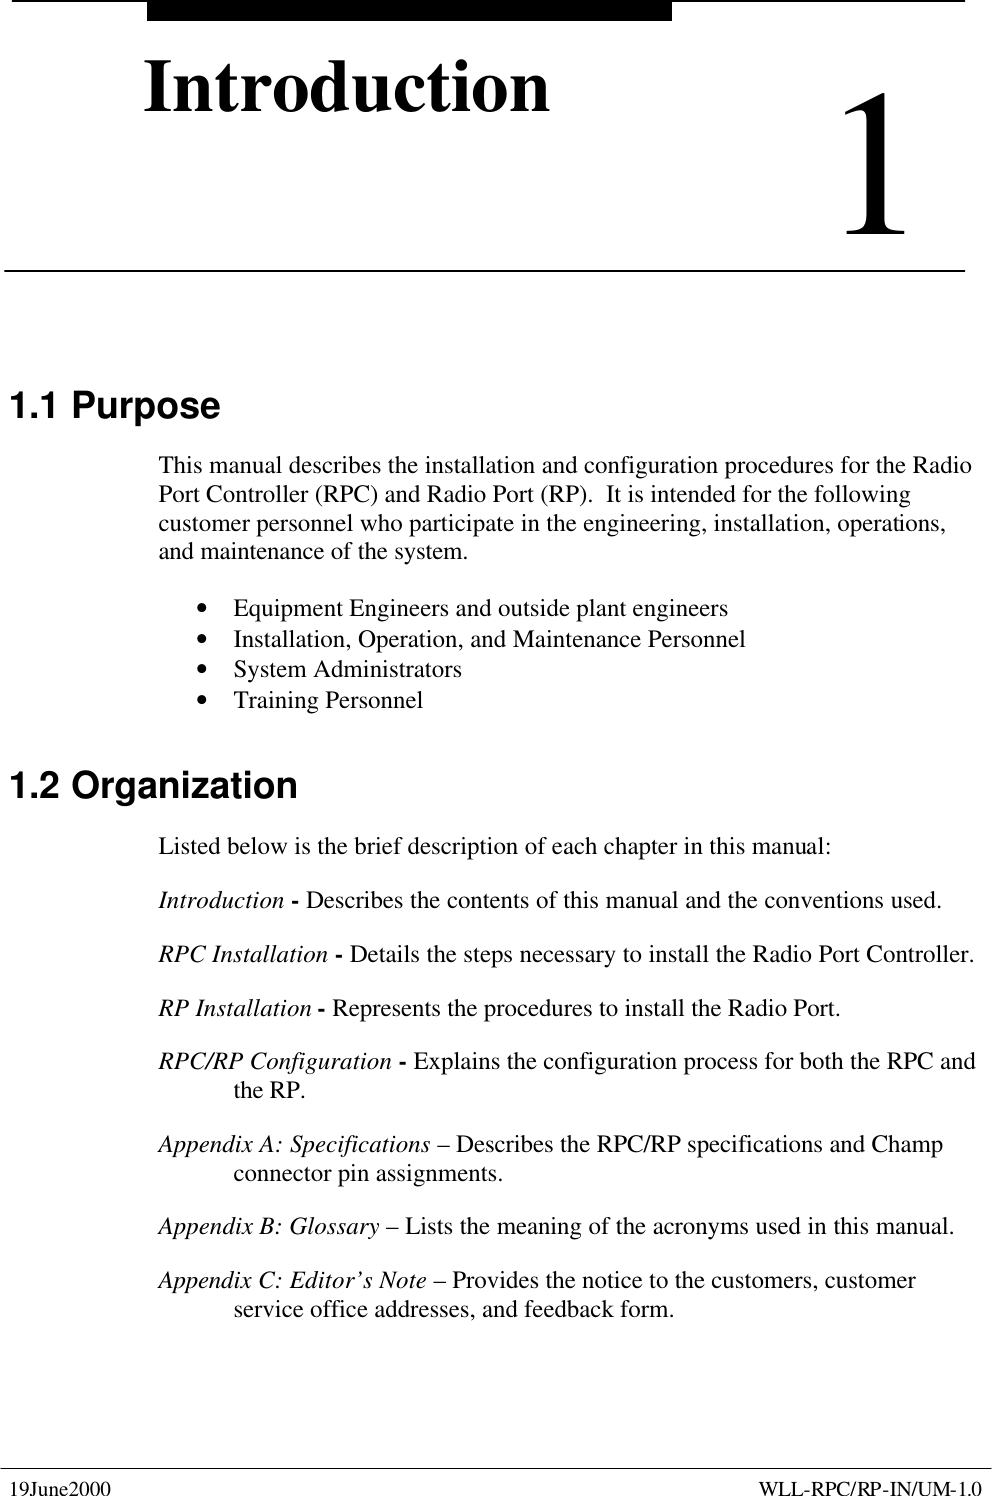      19June2000    WLL-RPC/RP-IN/UM-1.0 1Introduction1 Introduction 1.1 Purpose This manual describes the installation and configuration procedures for the Radio Port Controller (RPC) and Radio Port (RP).  It is intended for the following customer personnel who participate in the engineering, installation, operations, and maintenance of the system. • Equipment Engineers and outside plant engineers • Installation, Operation, and Maintenance Personnel • System Administrators • Training Personnel 1.2 Organization Listed below is the brief description of each chapter in this manual: Introduction - Describes the contents of this manual and the conventions used. RPC Installation - Details the steps necessary to install the Radio Port Controller. RP Installation - Represents the procedures to install the Radio Port. RPC/RP Configuration - Explains the configuration process for both the RPC and the RP. Appendix A: Specifications – Describes the RPC/RP specifications and Champ connector pin assignments. Appendix B: Glossary – Lists the meaning of the acronyms used in this manual. Appendix C: Editor’s Note – Provides the notice to the customers, customer service office addresses, and feedback form. 